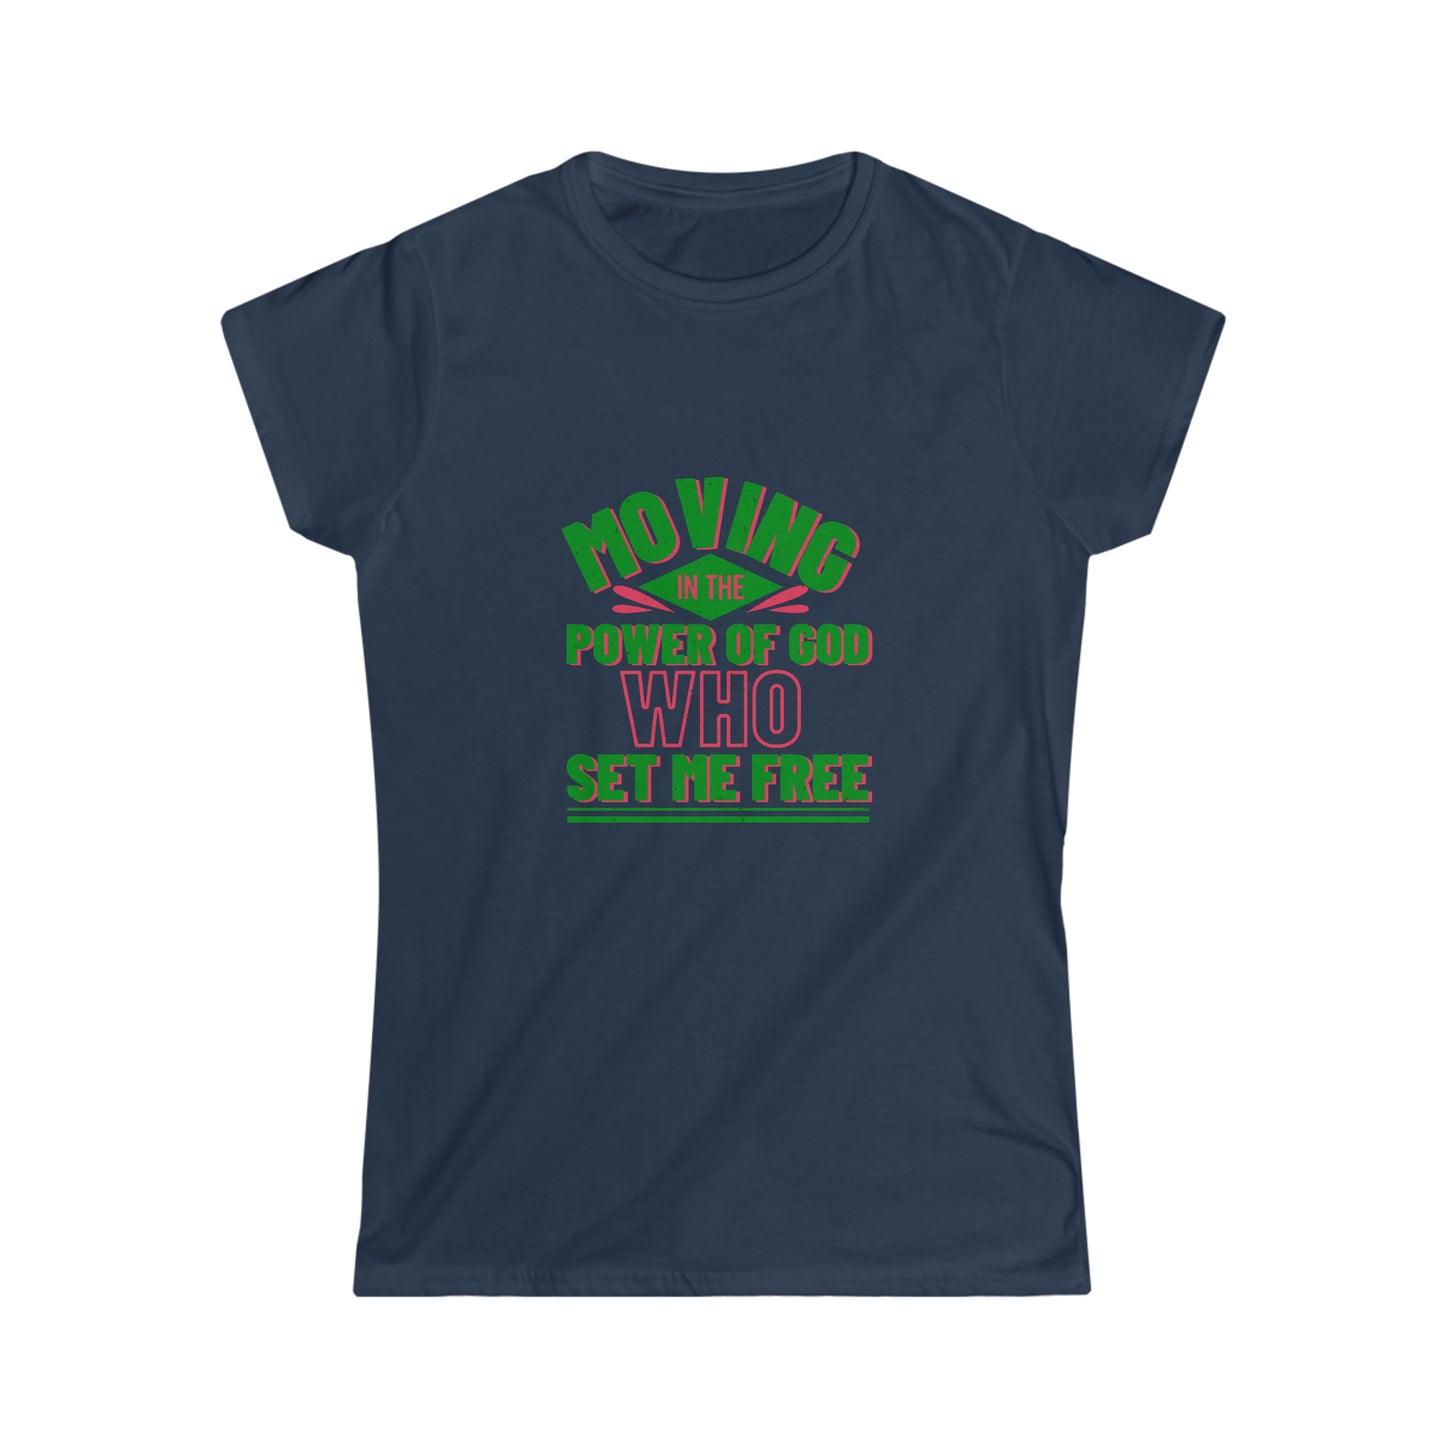 Moving In The Power Of God Who Set Me Free Women's T-shirt